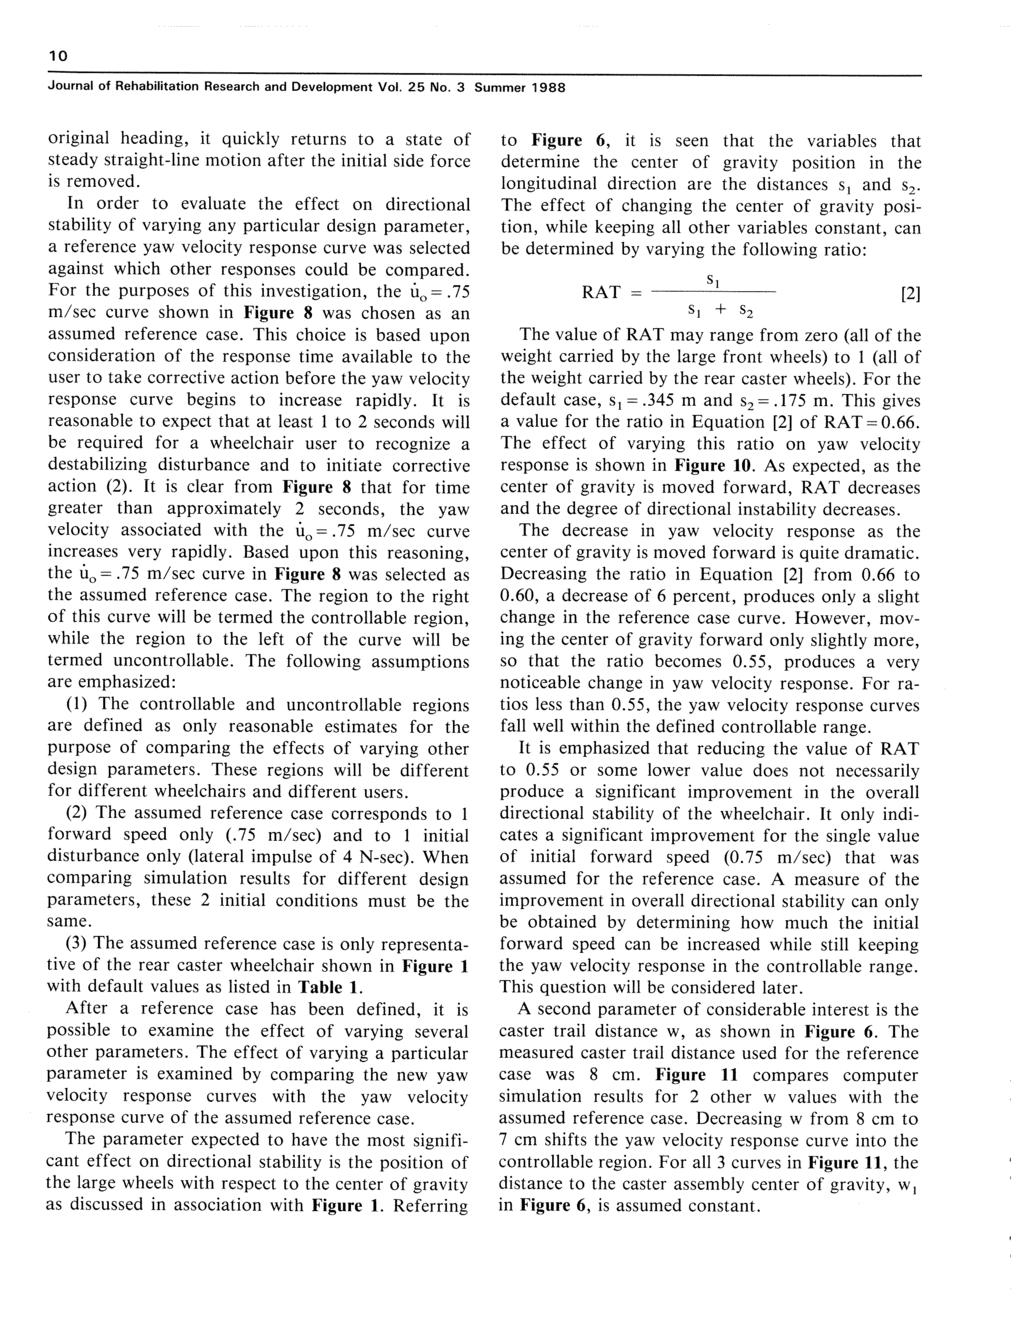 10 Journal of Rehabilitation Research and Development Vol. 25 No. 3 Summer 1988 original heading, it quickly returns to a state of steady straight-line motion after the initial side force is removed.